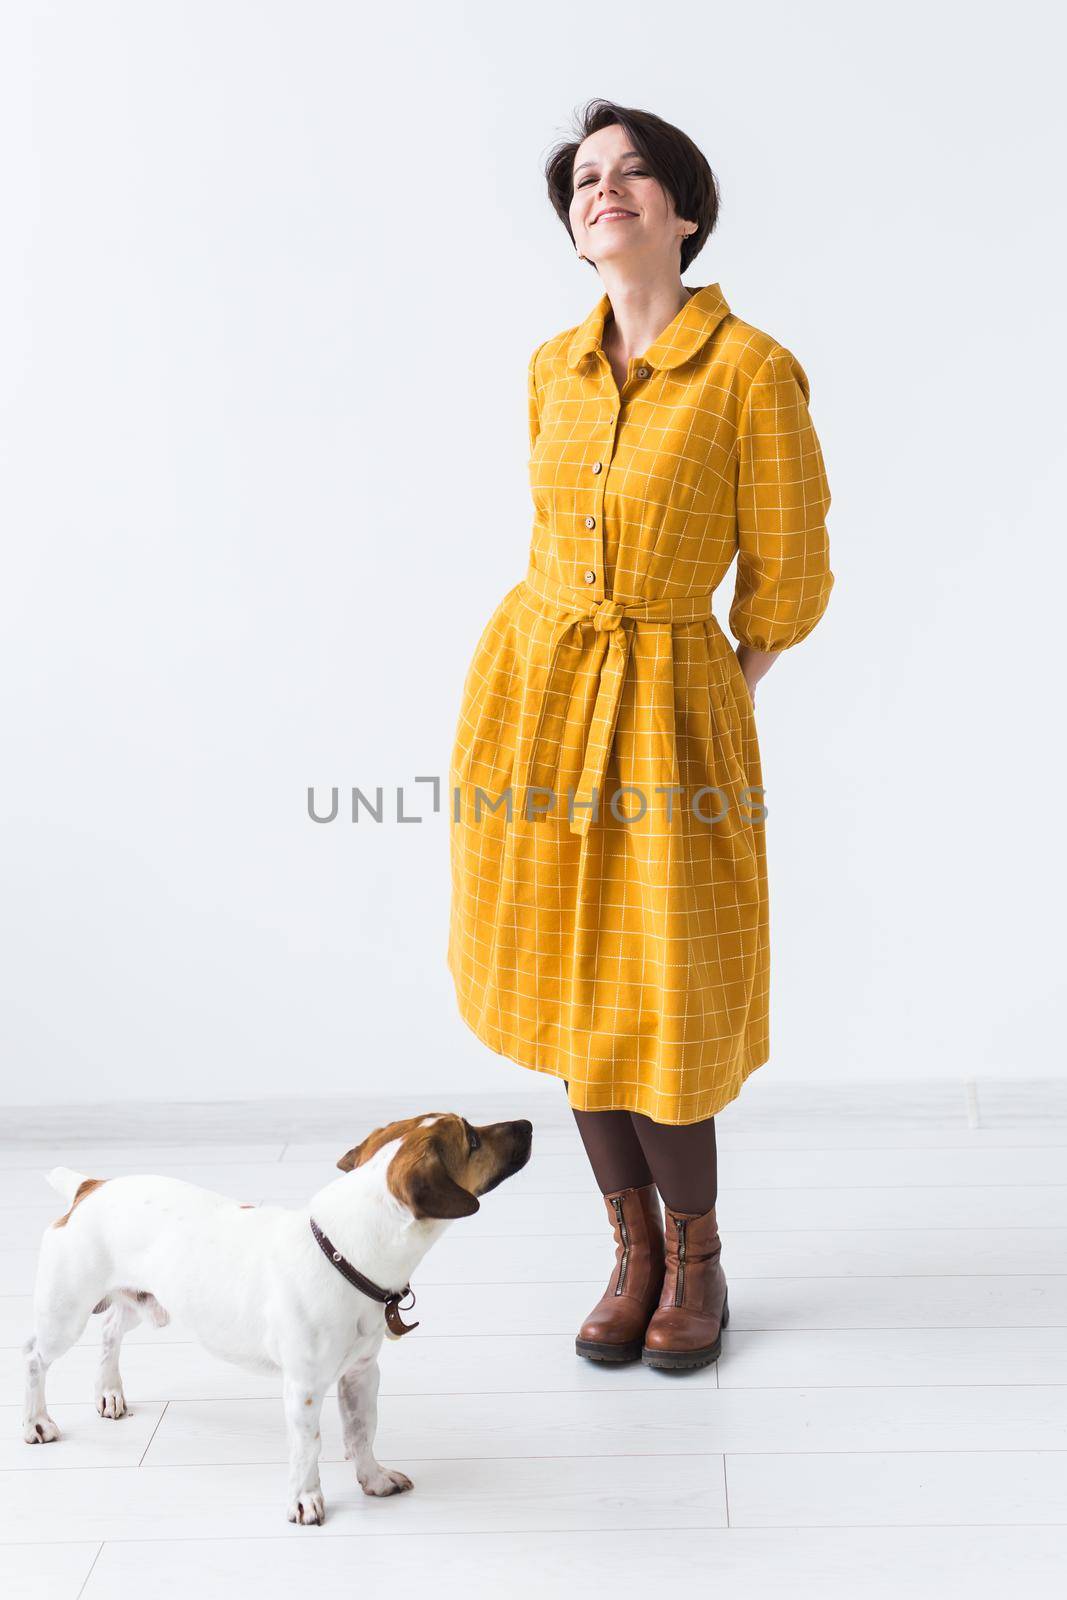 Cheerful young woman posing in a yellow dress with her beloved dog Jack Russell Terrier standing on a white background. The concept of casual wear. by Satura86